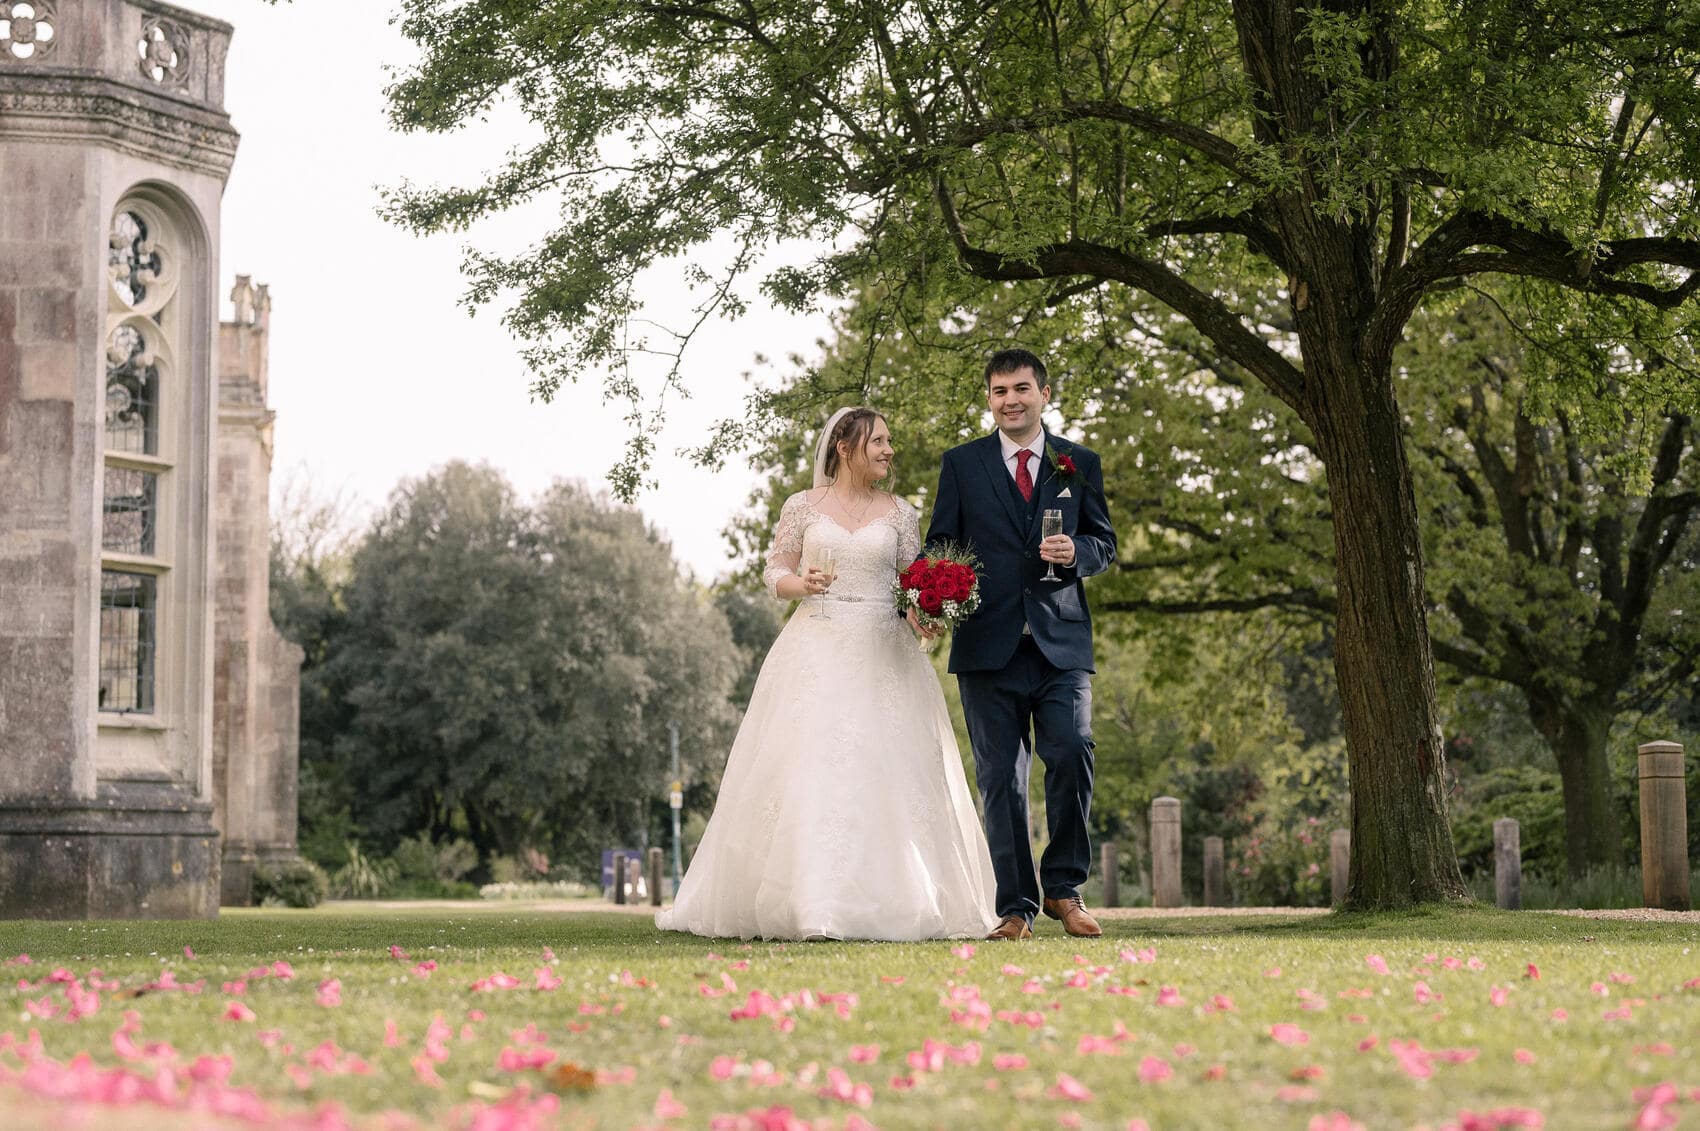 Bride and groom take a walk through the grounds of Highcliffe castle wedding